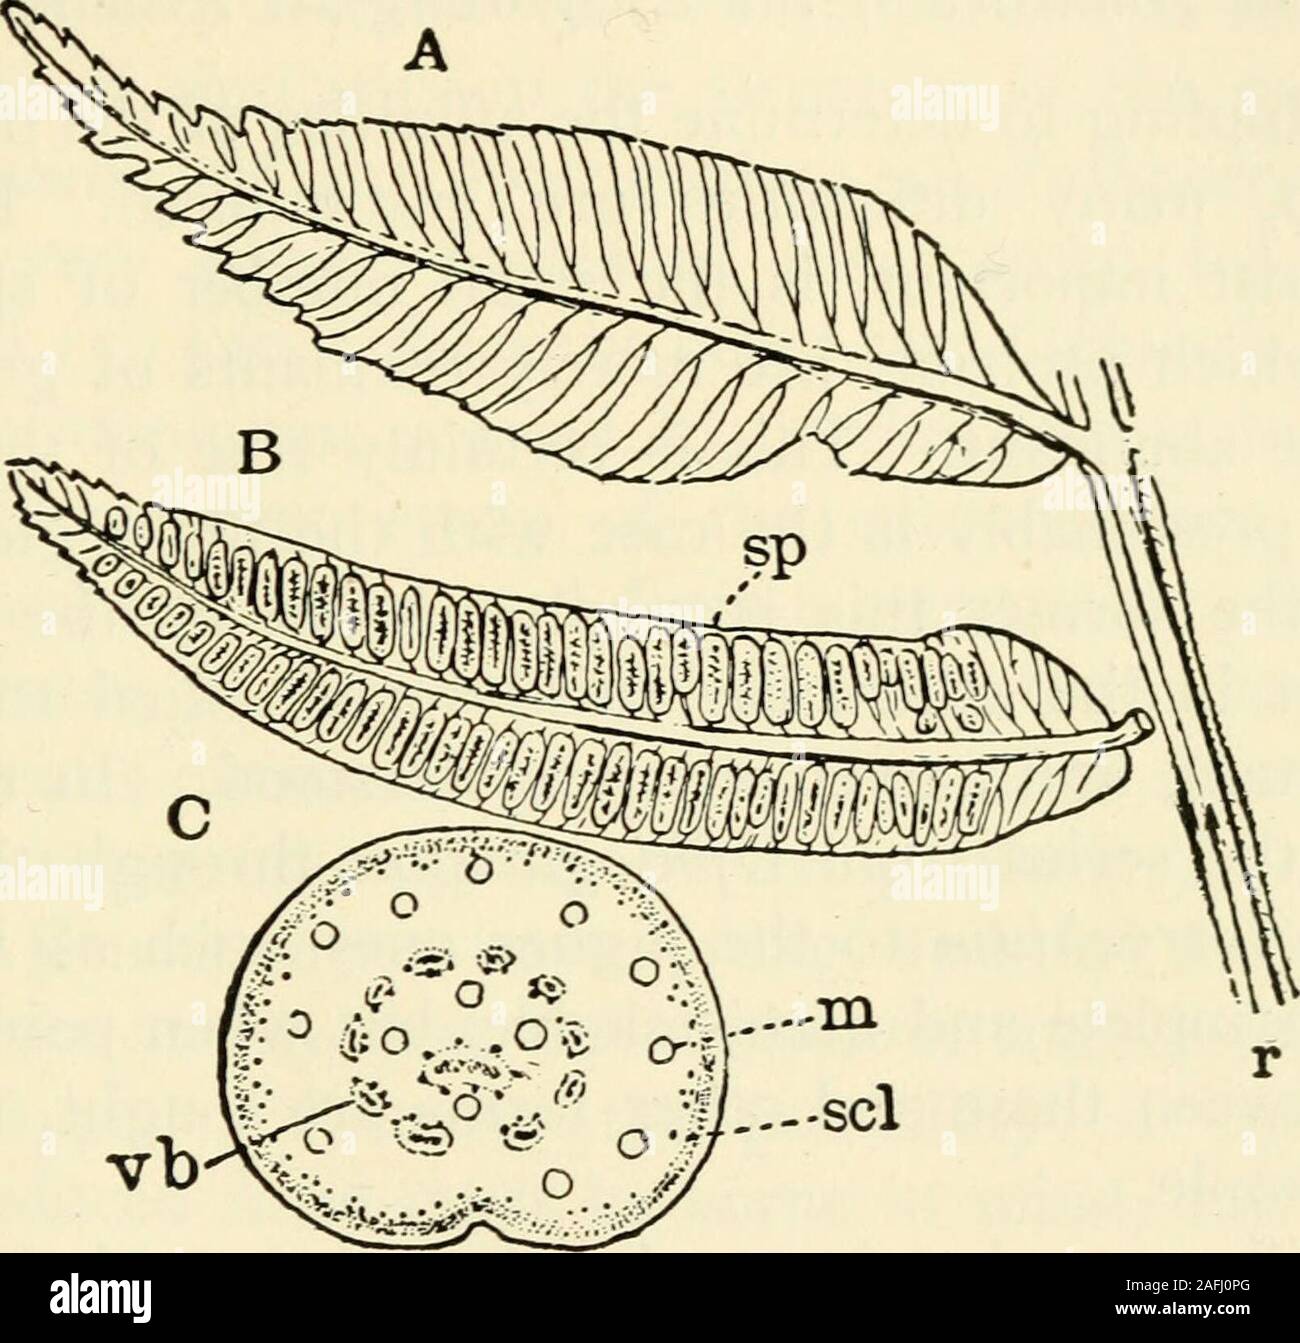 . The structure and development of mosses and ferns (Archegoniatae). ication of the Marattiace^ - The living Marattiaceae (Bitter (i)) may be divided intofour sub-families, of which the first, Angiopteridese includestwo genera, Angiopteris and Archangiopteris, while the others,Marattiese, Kaulfussiese, and Danaease, contains each but asingle genus. - - VIII MARATTIALES 299 Marattia includes about twelve species of tropical and sub-tropical Ferns, both of the Old World and the New. Kaiil-fussia includes but a single species, belonging to southeasternAsia. The synangia are scattered over the low Stock Photo